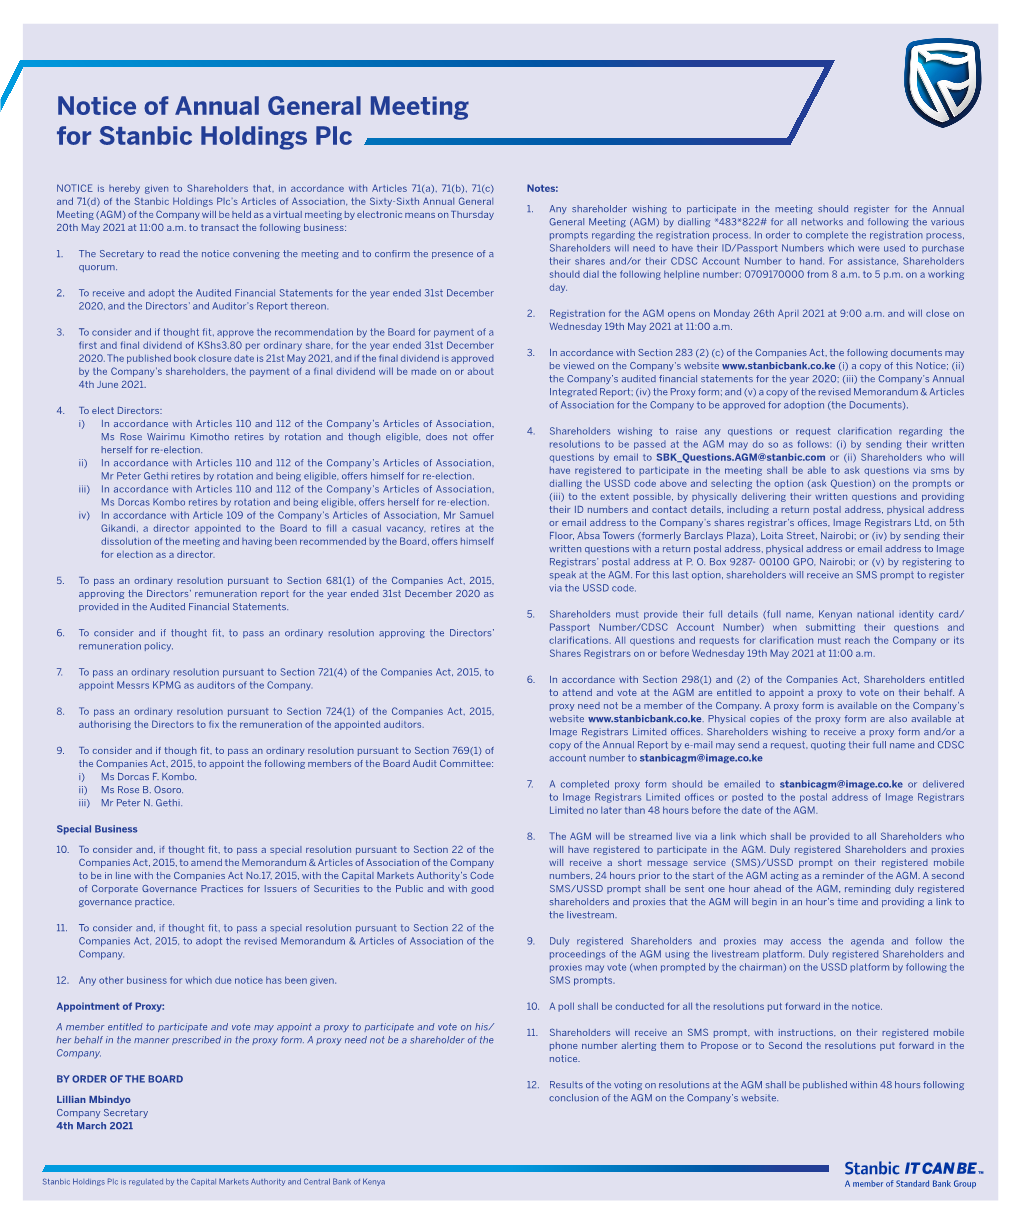 Notice of Annual General Meeting for Stanbic Holdings Plc